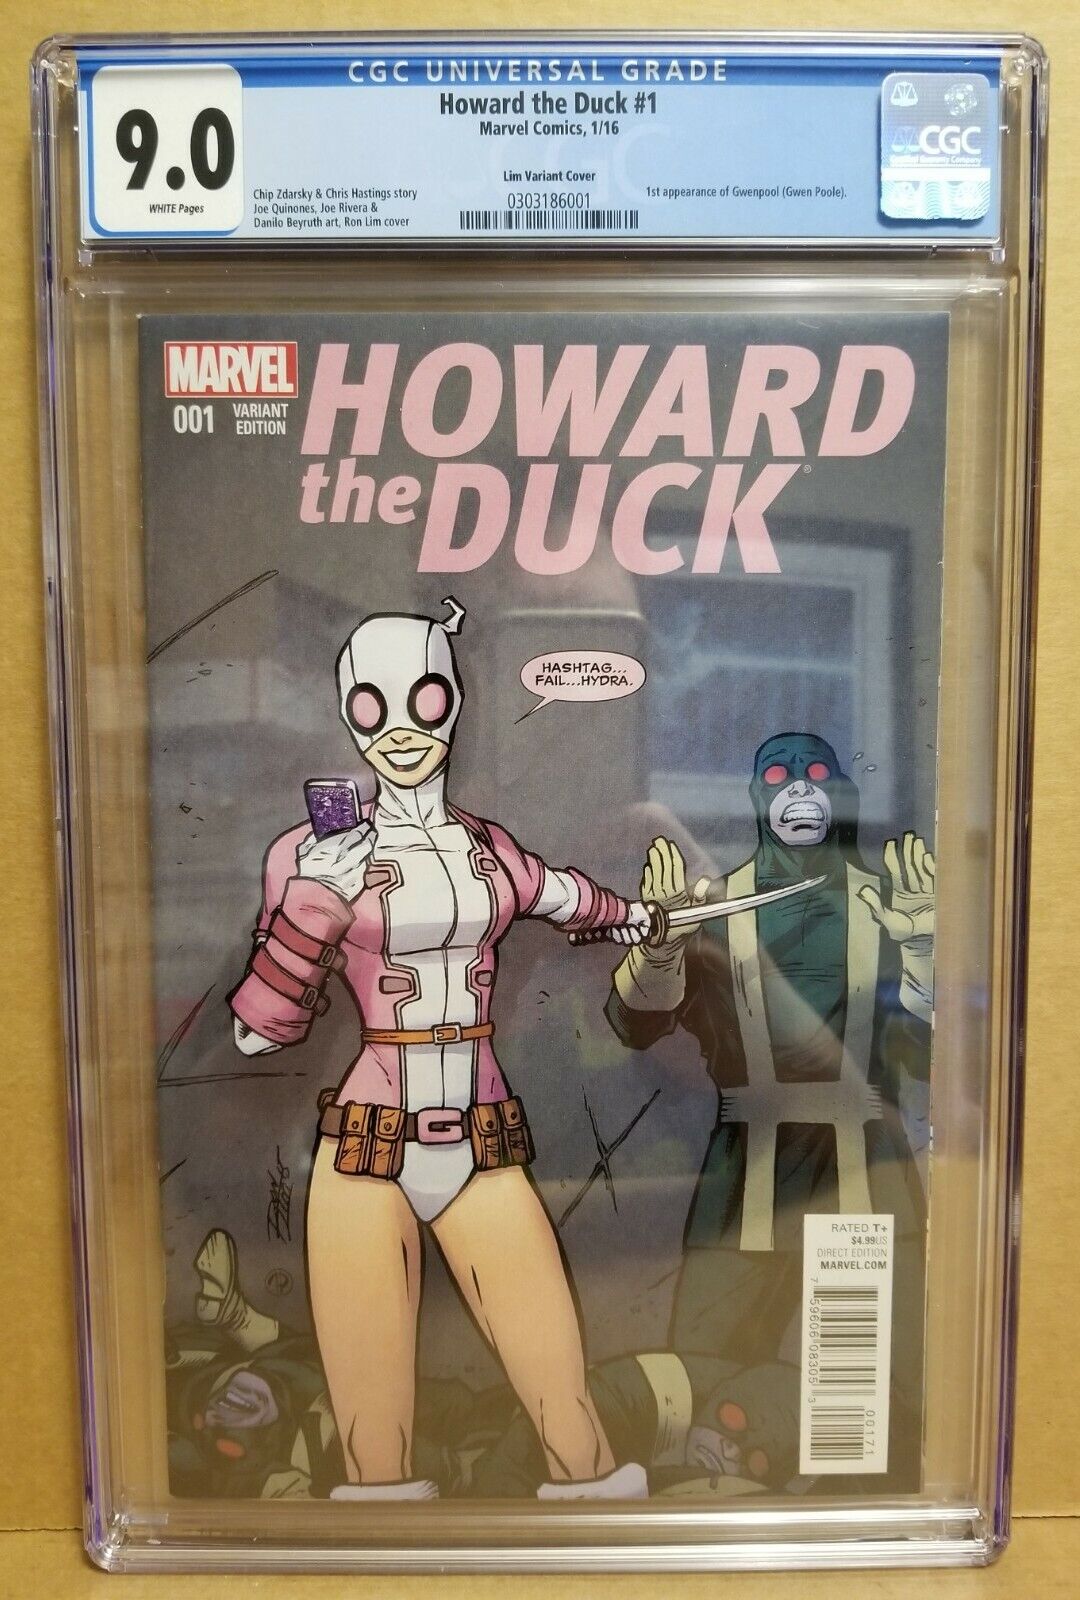 HOWARD THE DUCK #1 CGC 9.0 (VF/NM) RON LIM VARIANT 1ST GWENPOOL APPEARANCE RARE